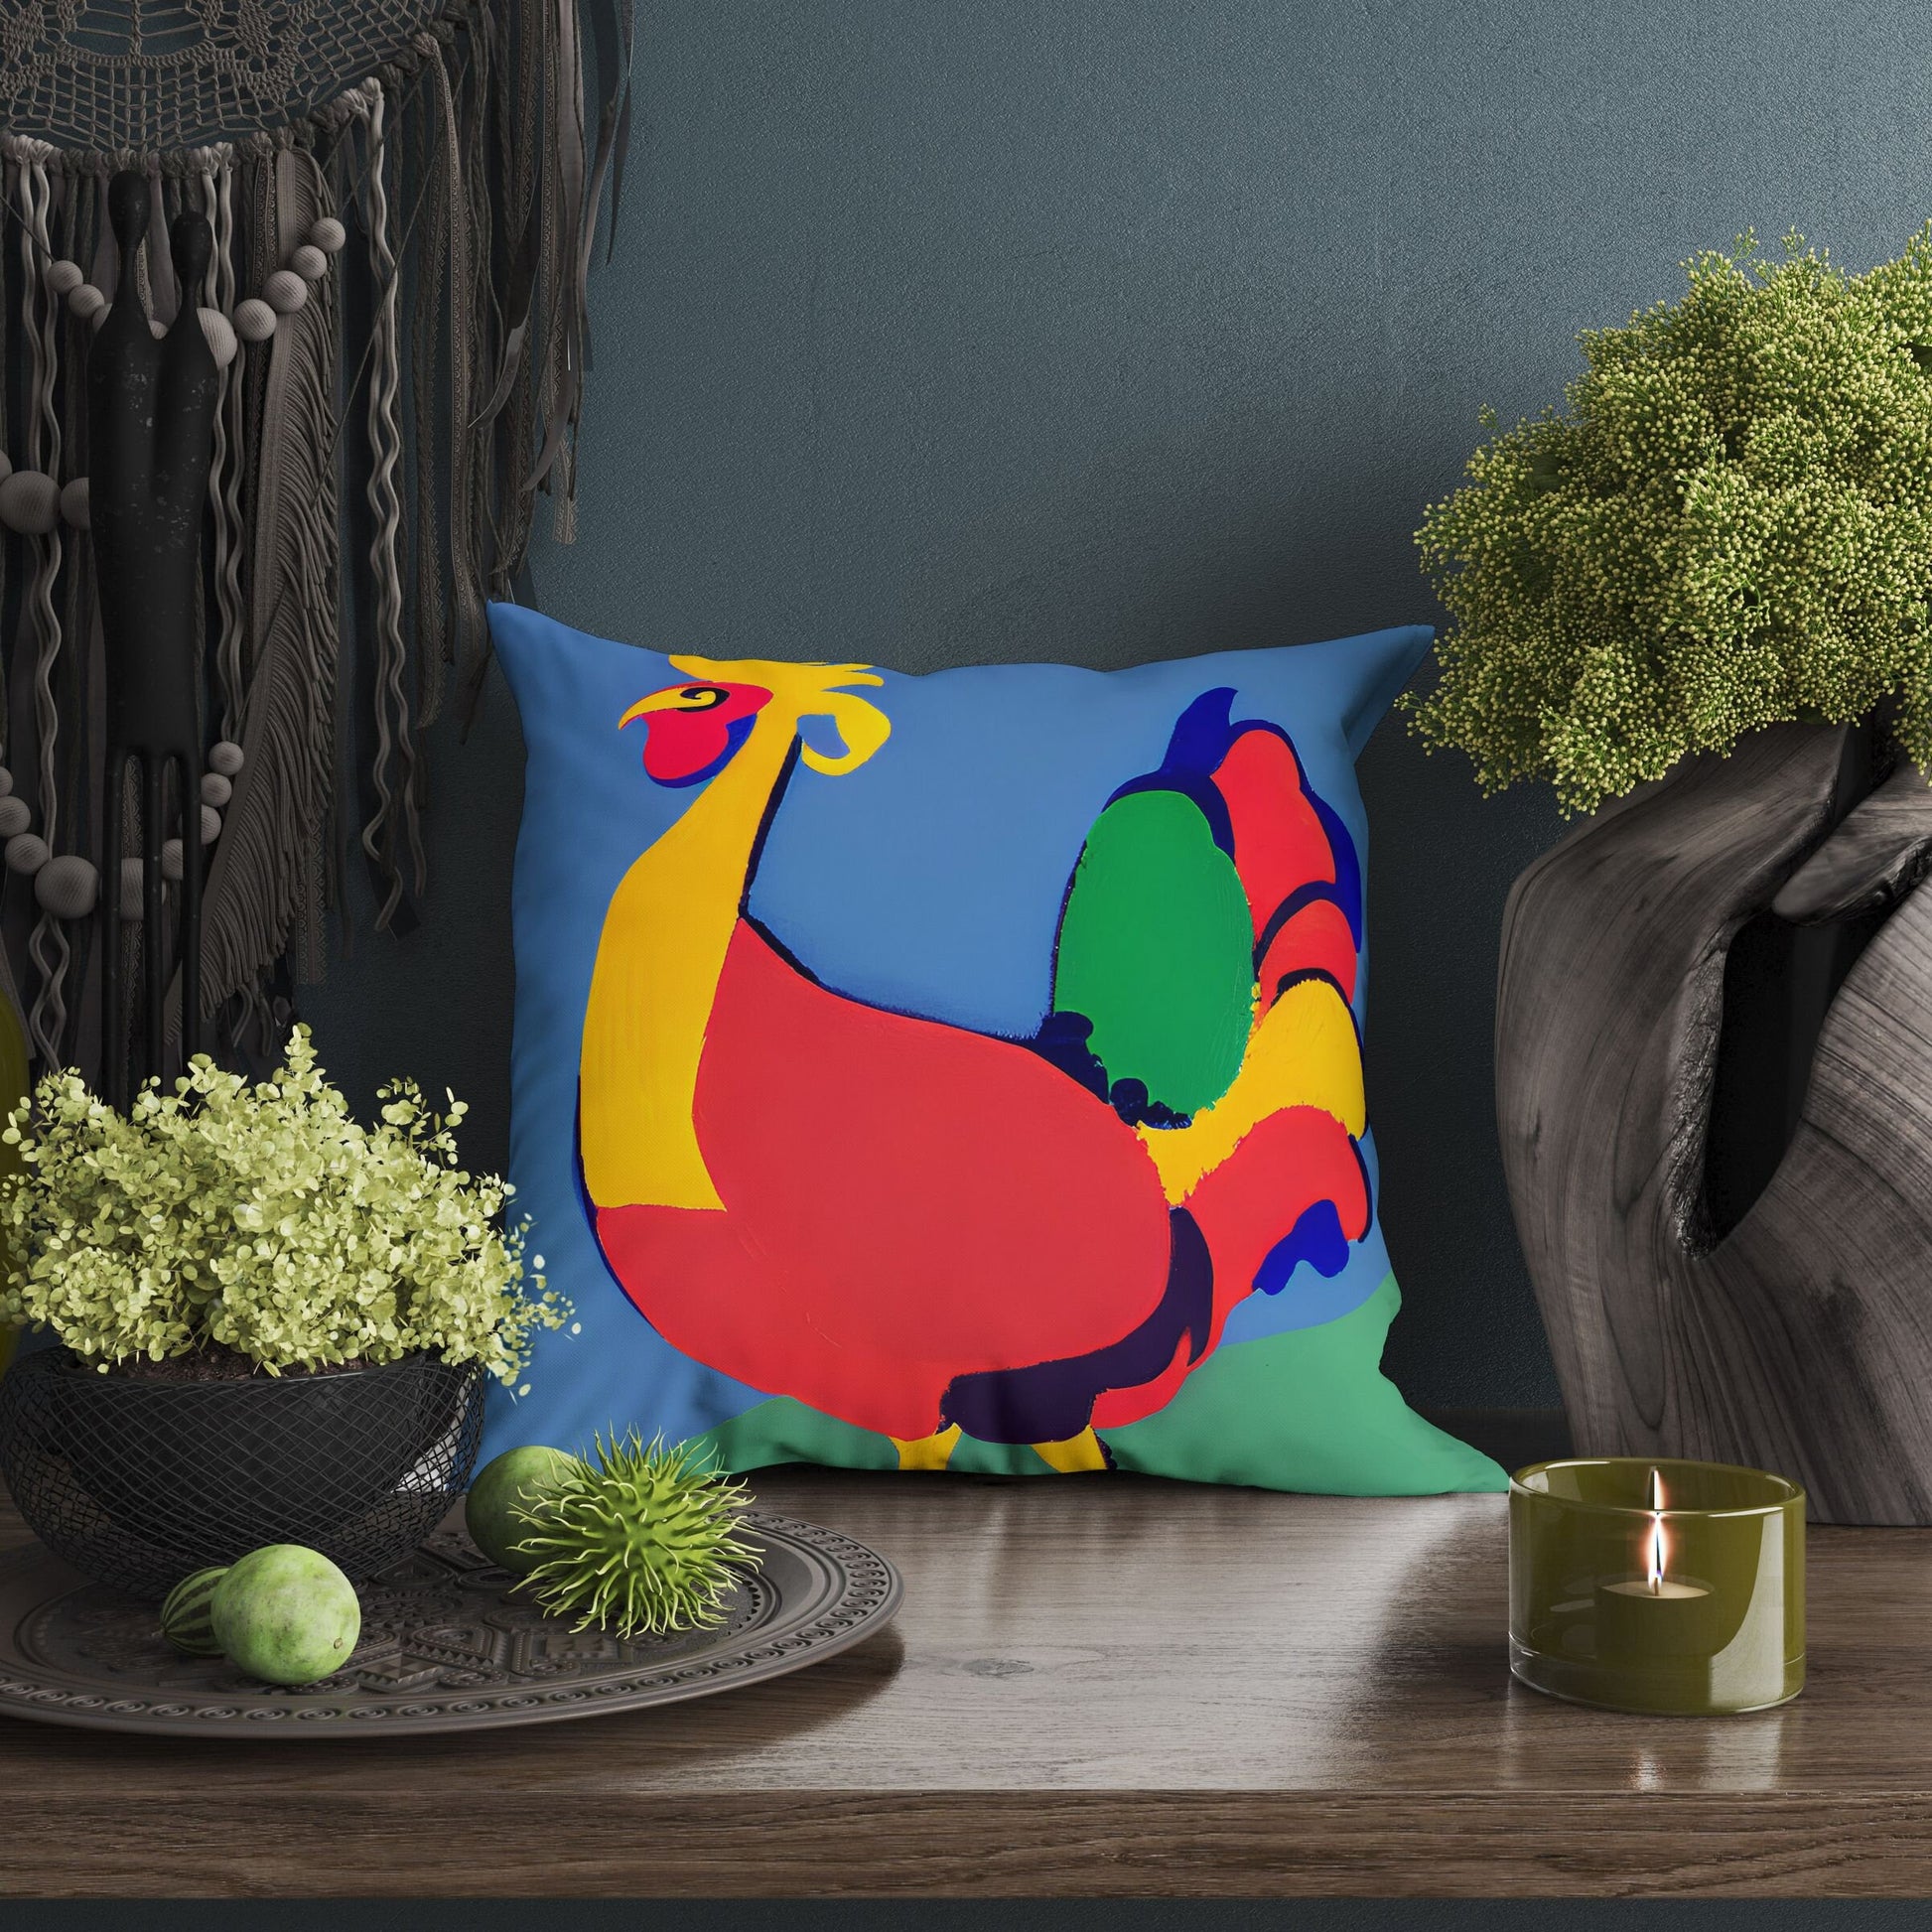 Original Art Rooster Tapestry Pillows, Abstract Throw Pillow Cover, Comfortable, Colorful Pillow Case, Watercolor Pillow Cases